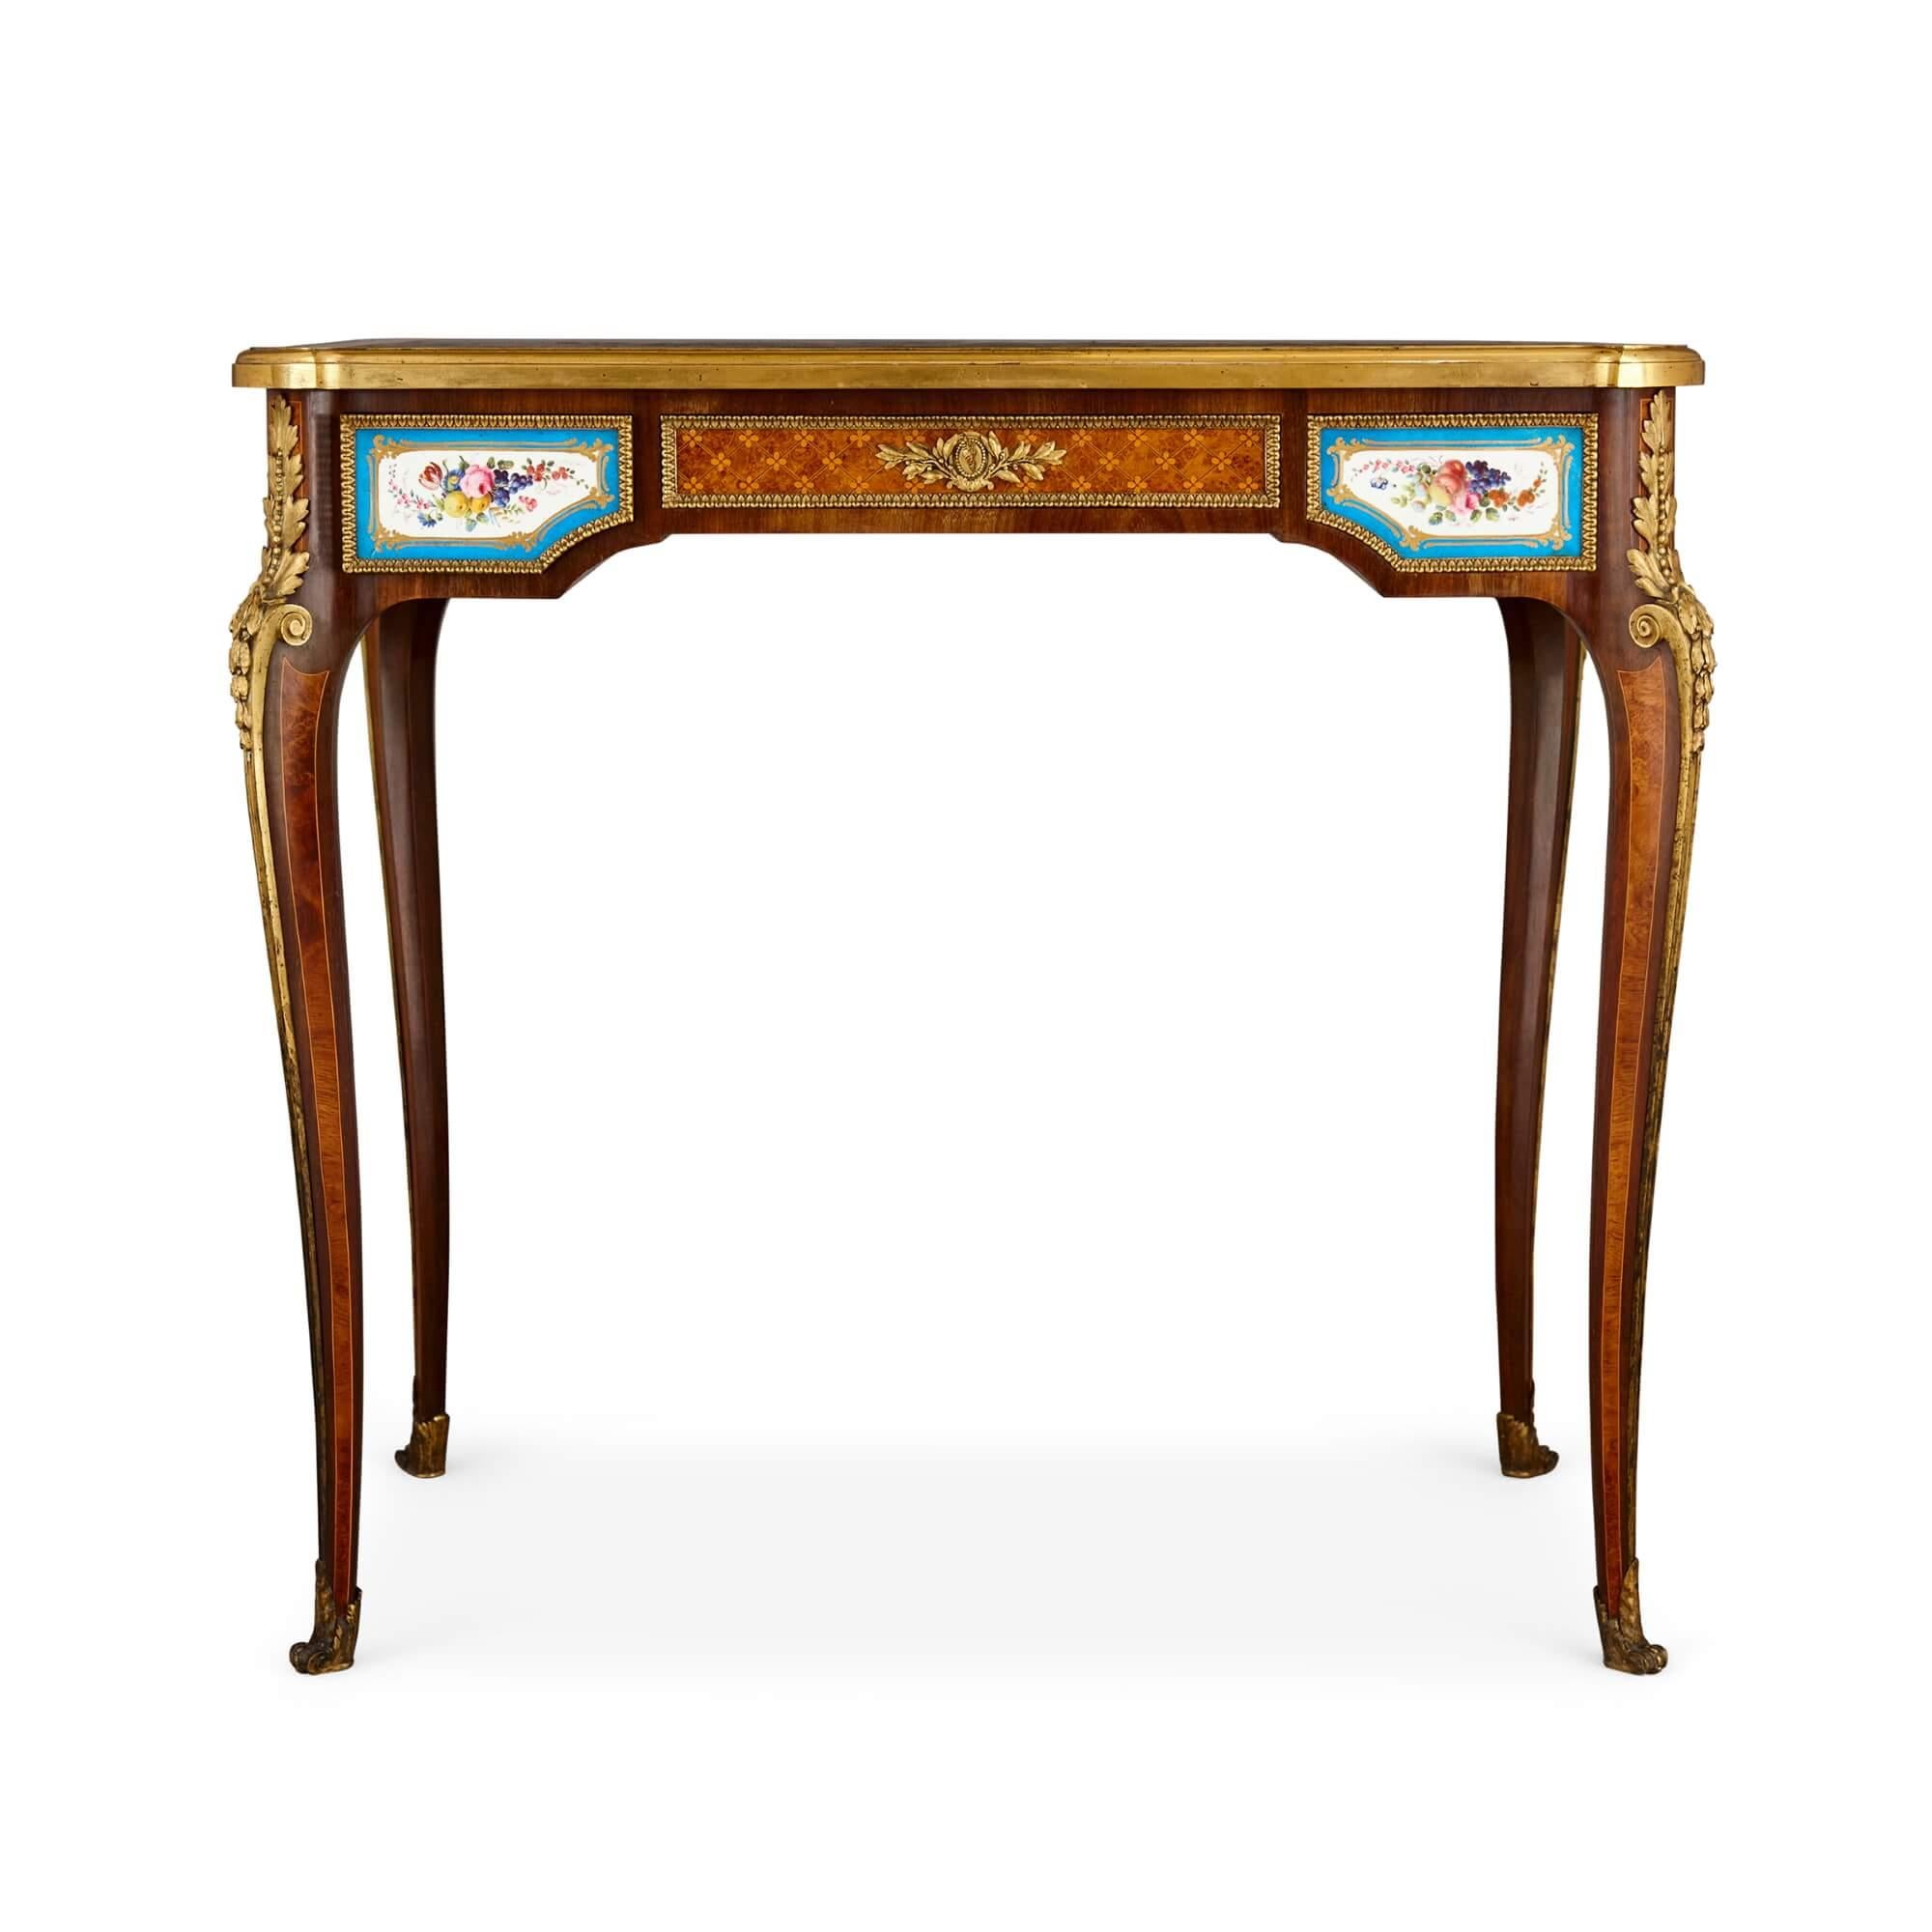 Very fine ormolu, porcelain and marquetry writing desk by Henry Dasson
French, 1890
Height 74cm, depth 80cm, depth 50cm

By Dasson, Henry (French, 1825-1896), a leading ébéniste of the French Belle Époque, this beautiful, delicate, and